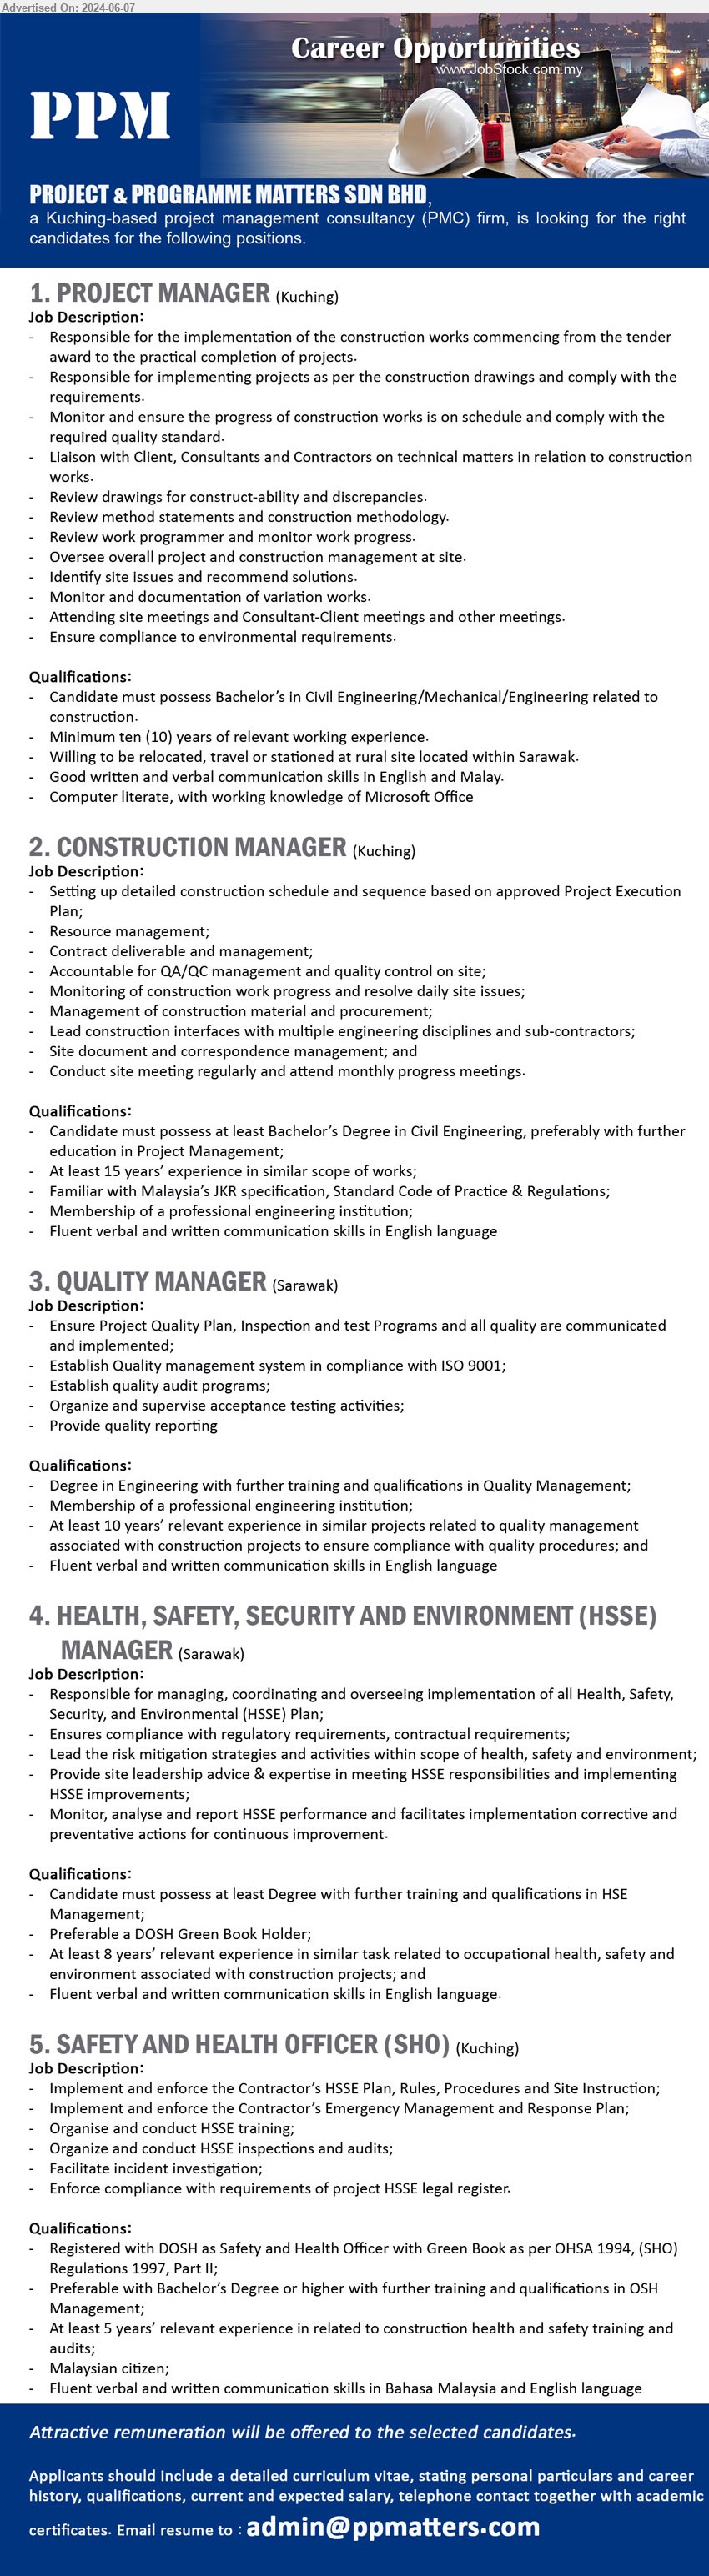 PROJECT & PROGRAMME MATTERS SDN BHD - 1. PROJECT MANAGER (Kuching), Bachelor’s in Civil Engineering/Mechanical/Engineering related to construction,...
2. CONSTRUCTION MANAGER (Kuching),  Bachelor’s Degree in Civil Engineering, preferably with further education in Project Management,...
3. QUALITY MANAGER (Sarawak), Degree in Engineering with further training and qualifications in Quality Management;,...
4. HEALTH, SAFETY, SECURITY AND ENVIRONMENT (HSSE) MANAGER (Sarawak), Degree with further training and qualifications in HSE 
Management; Preferable a DOSH Green Book Holder,...
5. SAFETY AND HEALTH OFFICER (SHO) (Kuching), Registered with DOSH as Safety and Health Officer with Green Book as per OHSA 1994, (SHO) Regulations 1997, Part II;,...
Email resume to ...